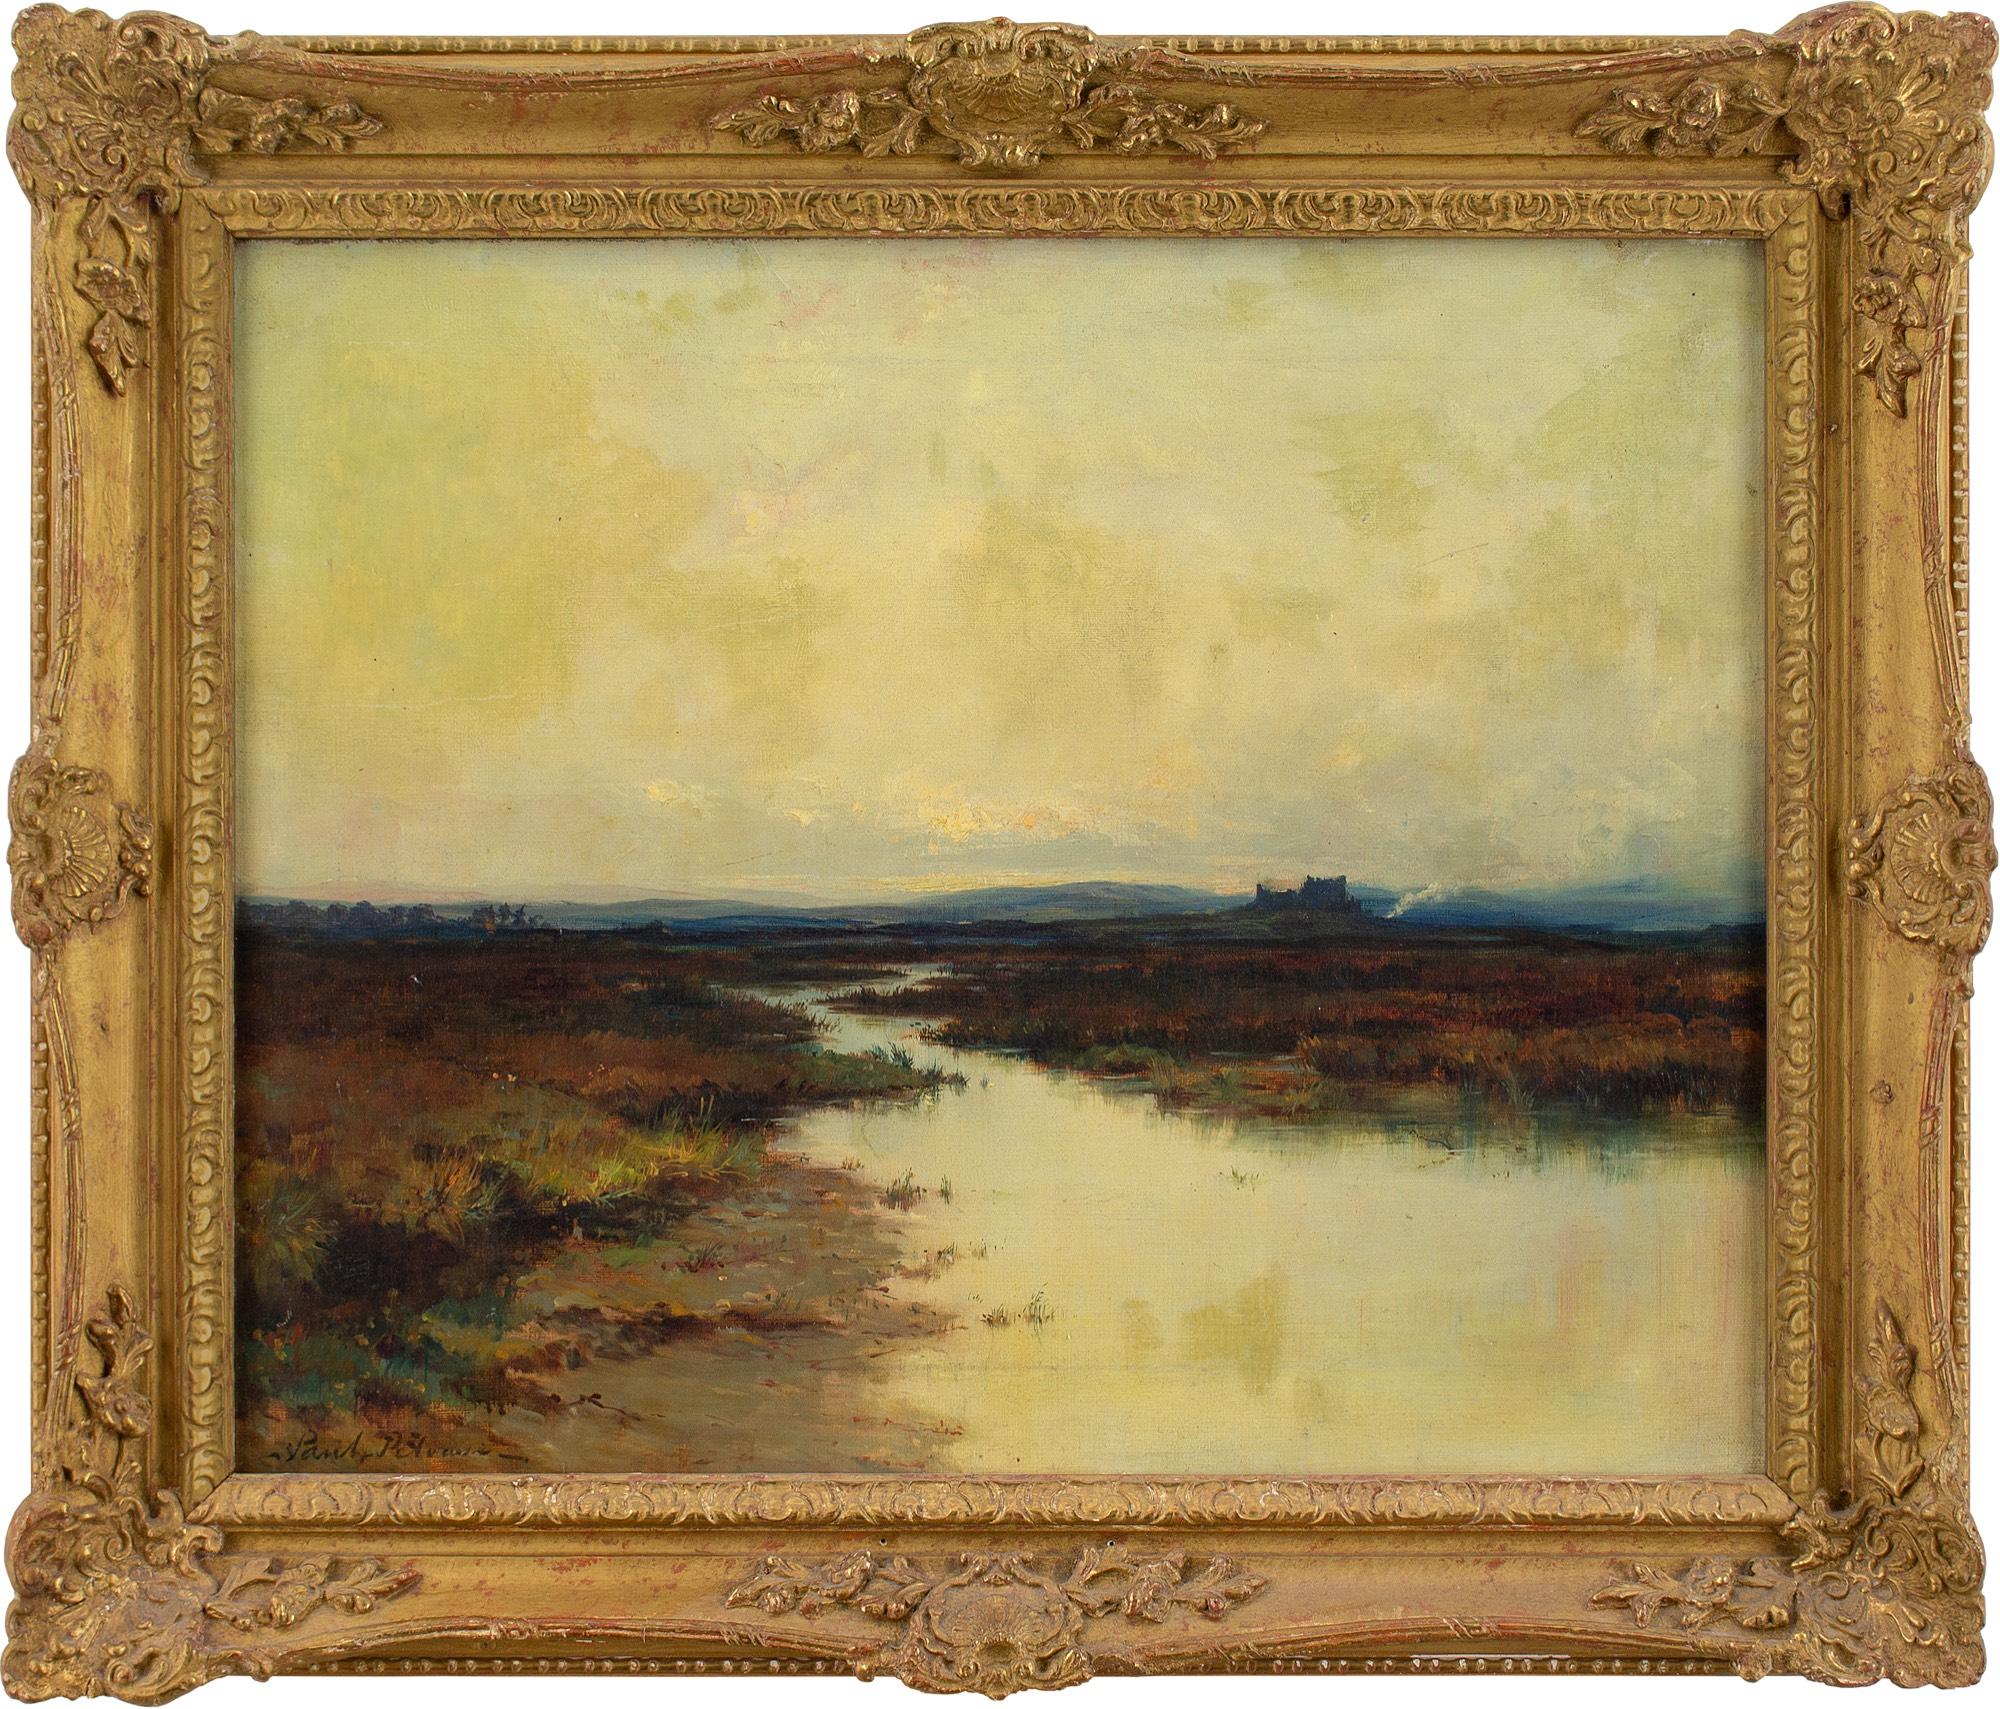 Unknown Landscape Painting - Early 20th-Century Tonalist School, Landscape With Ruins, Oil Painting 